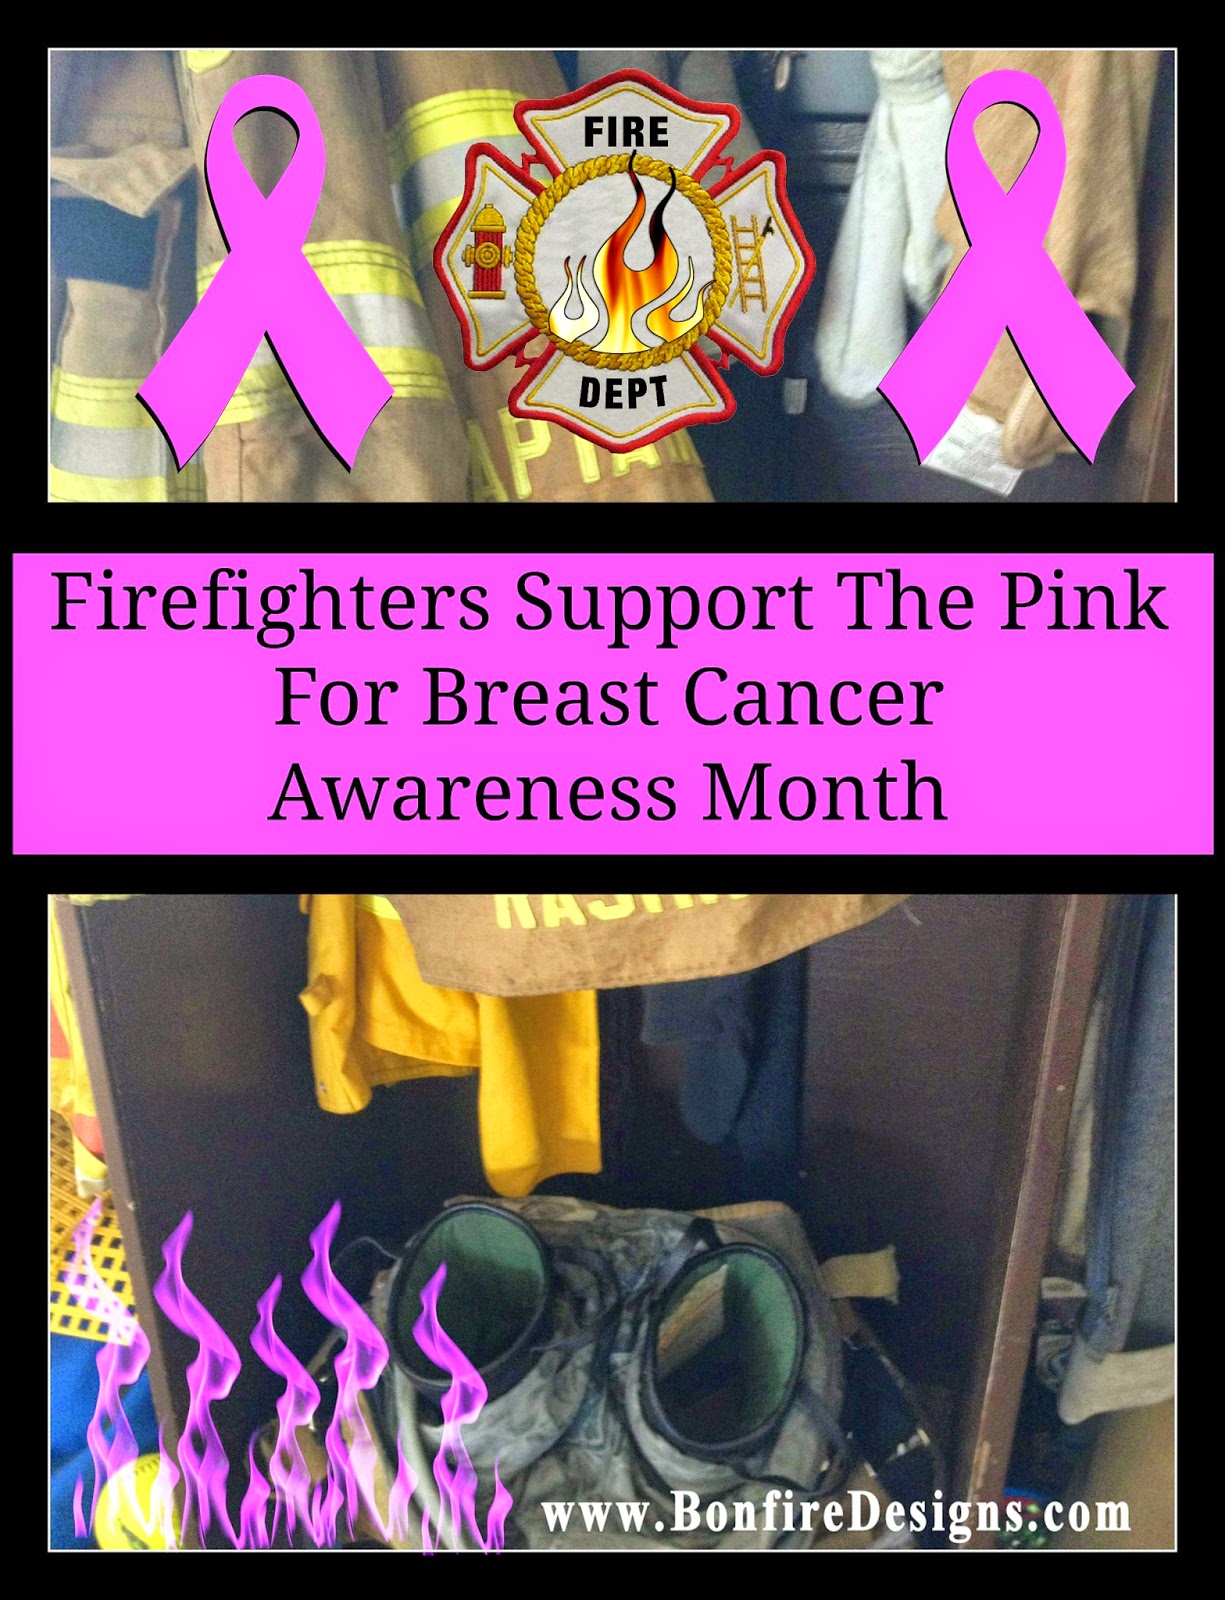 Firefighters Go Pink To Support Breast Cancer Awareness Month